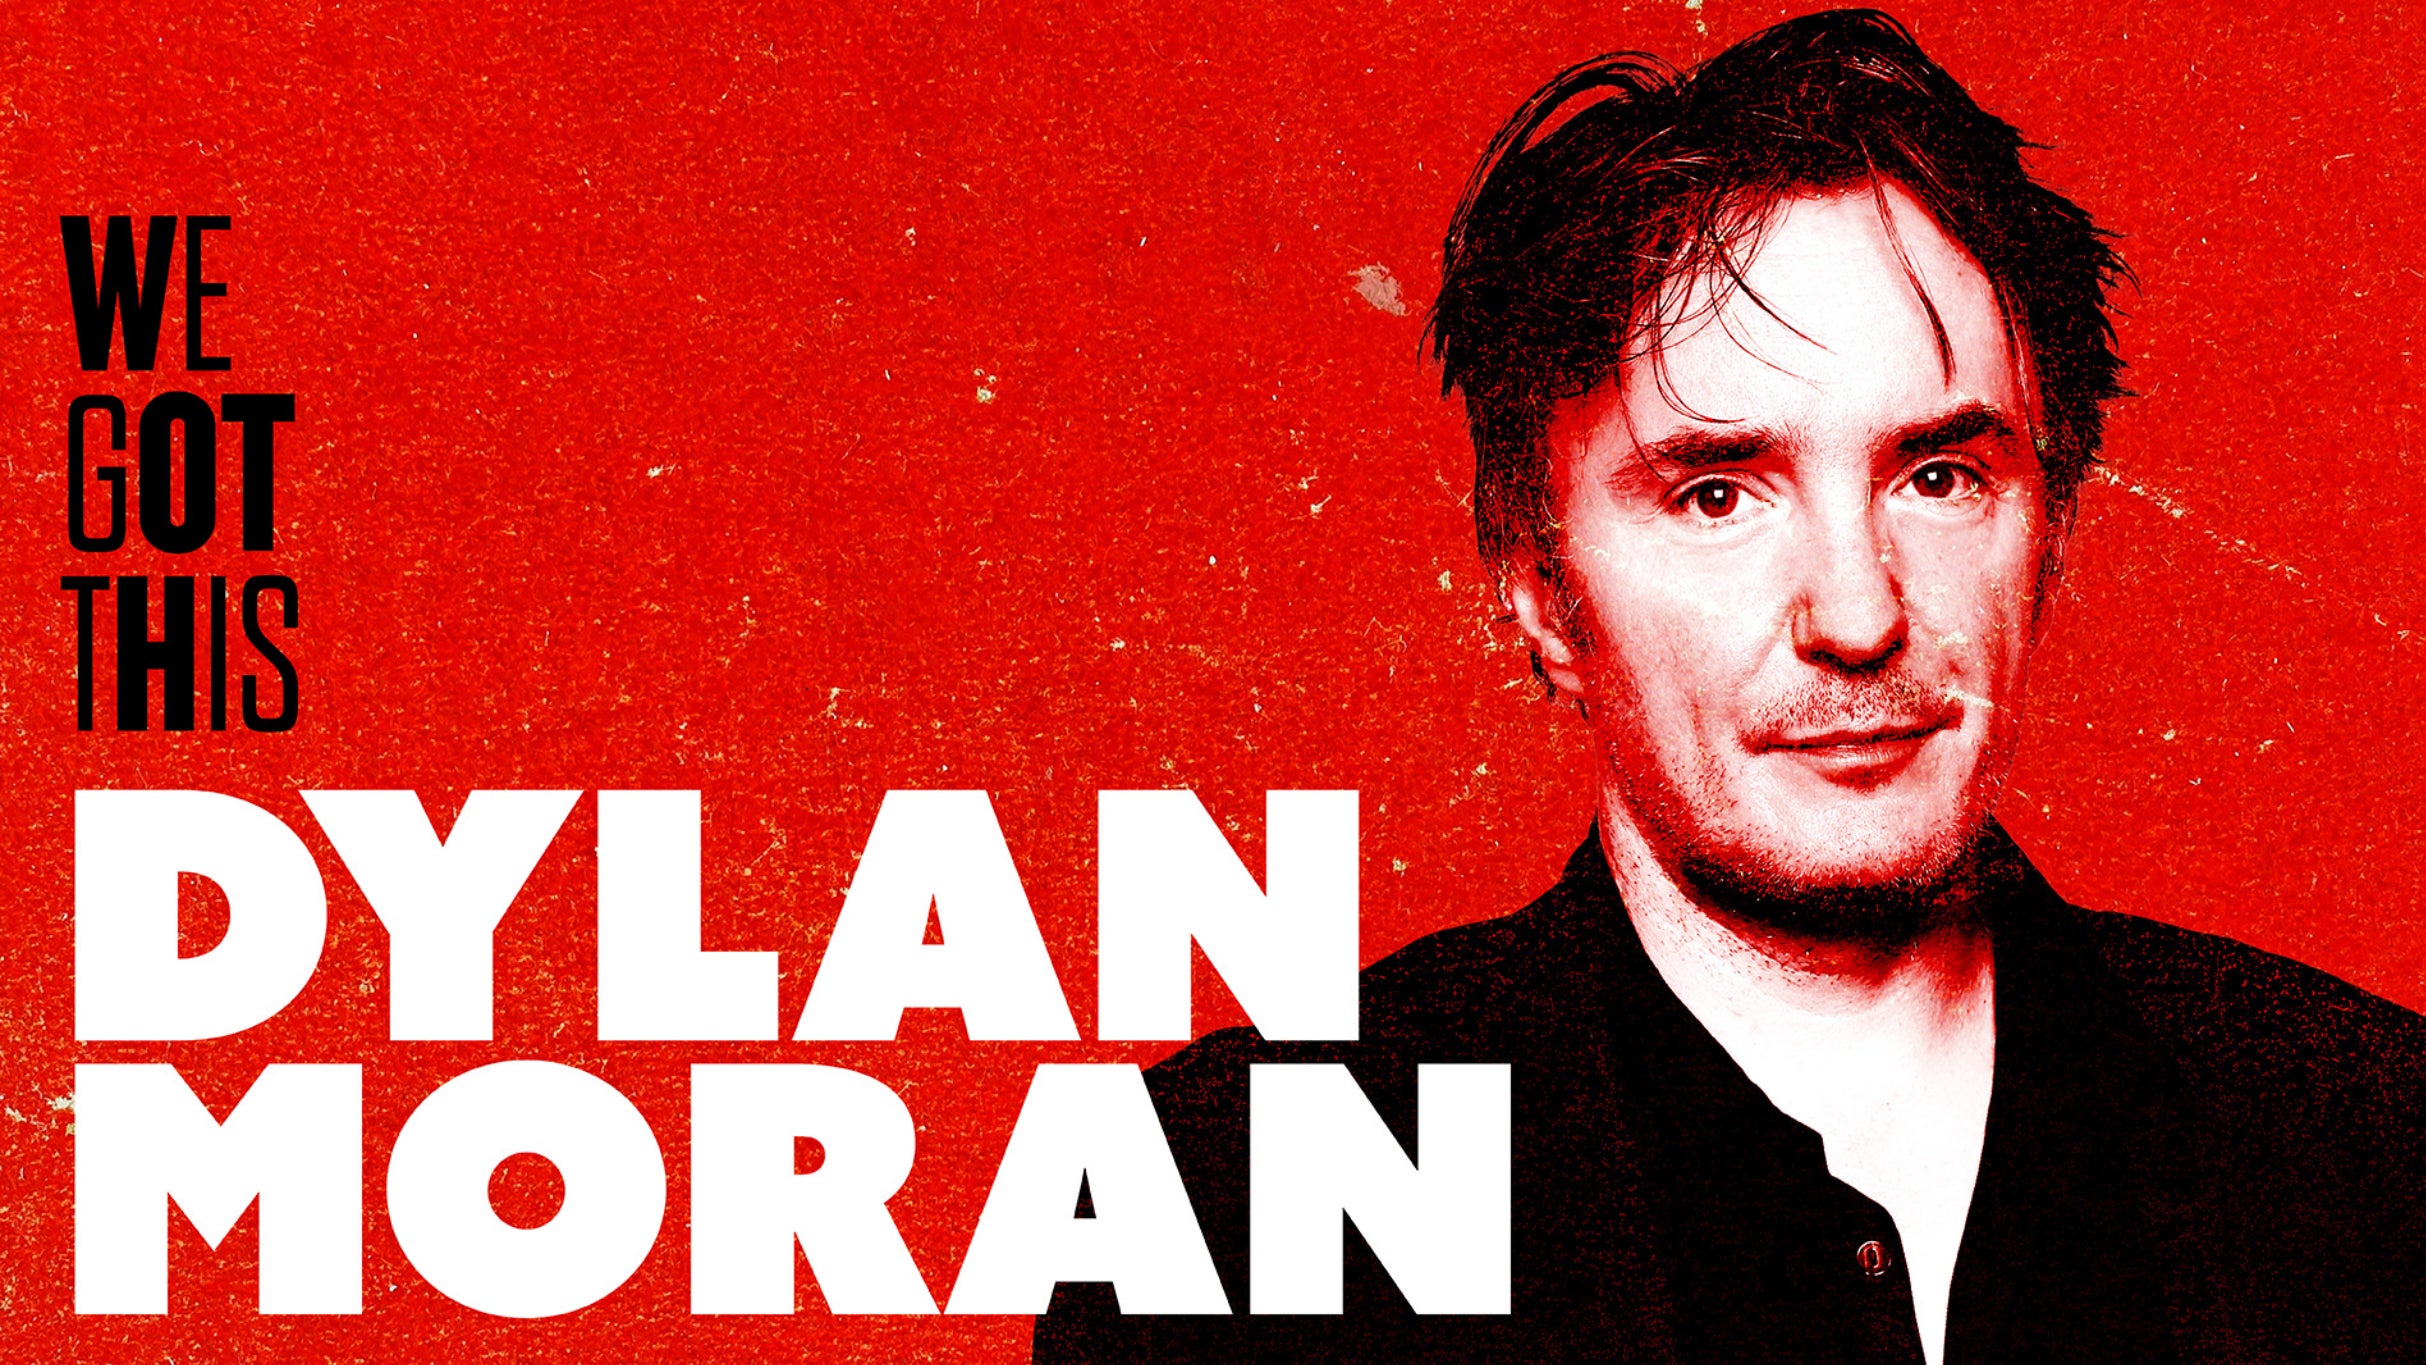 Image used with permission from Ticketmaster | Dylan Moran - We Got This tickets